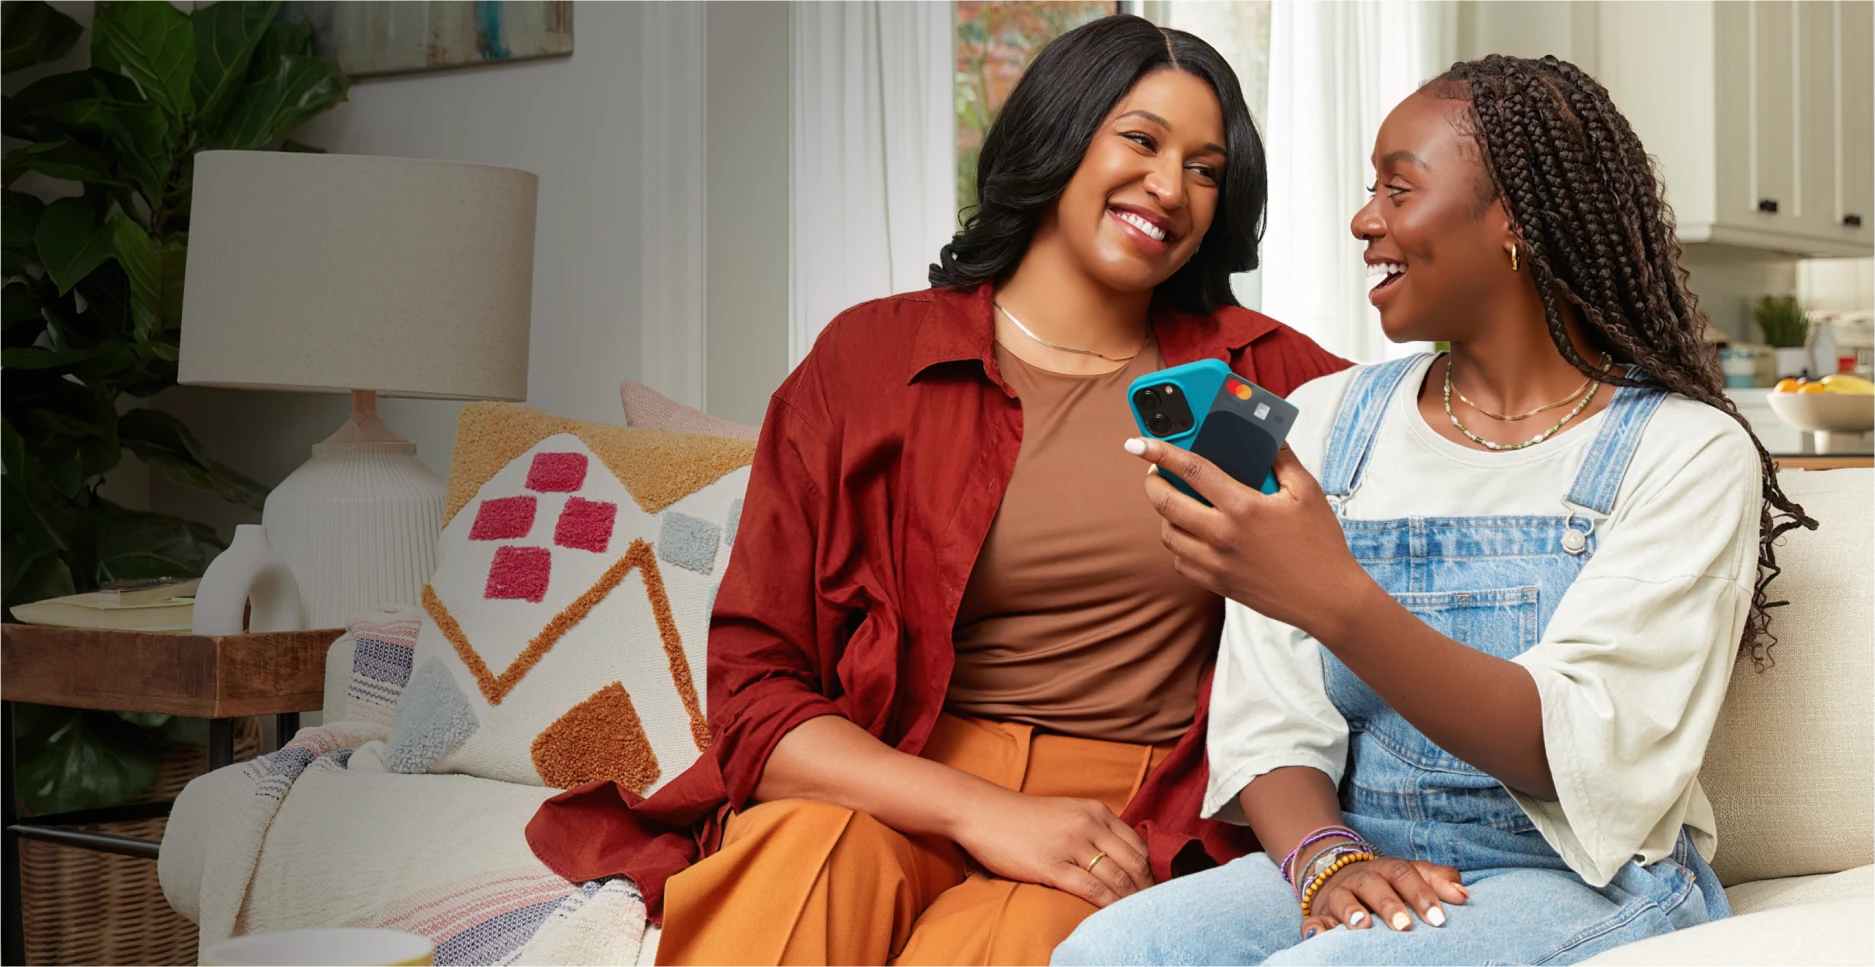 Mother and daughter on a couch holding a card and cellphone